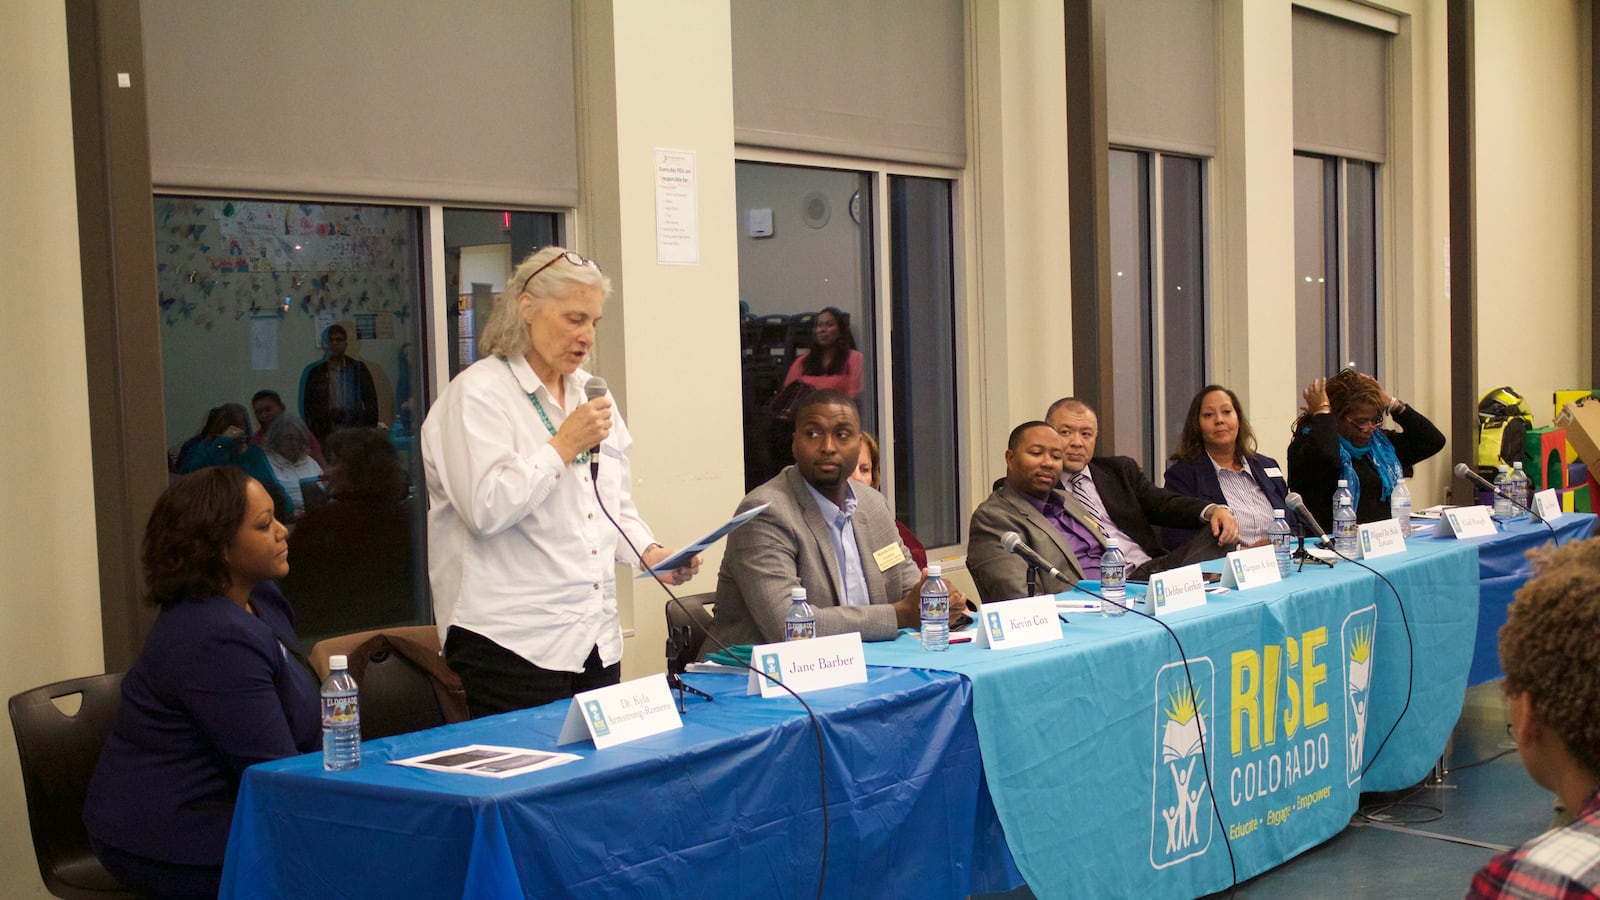 Aurora's school board candidates at a candidate forum hosted by RISE Colorado. (Photo by Yesenia Robles)